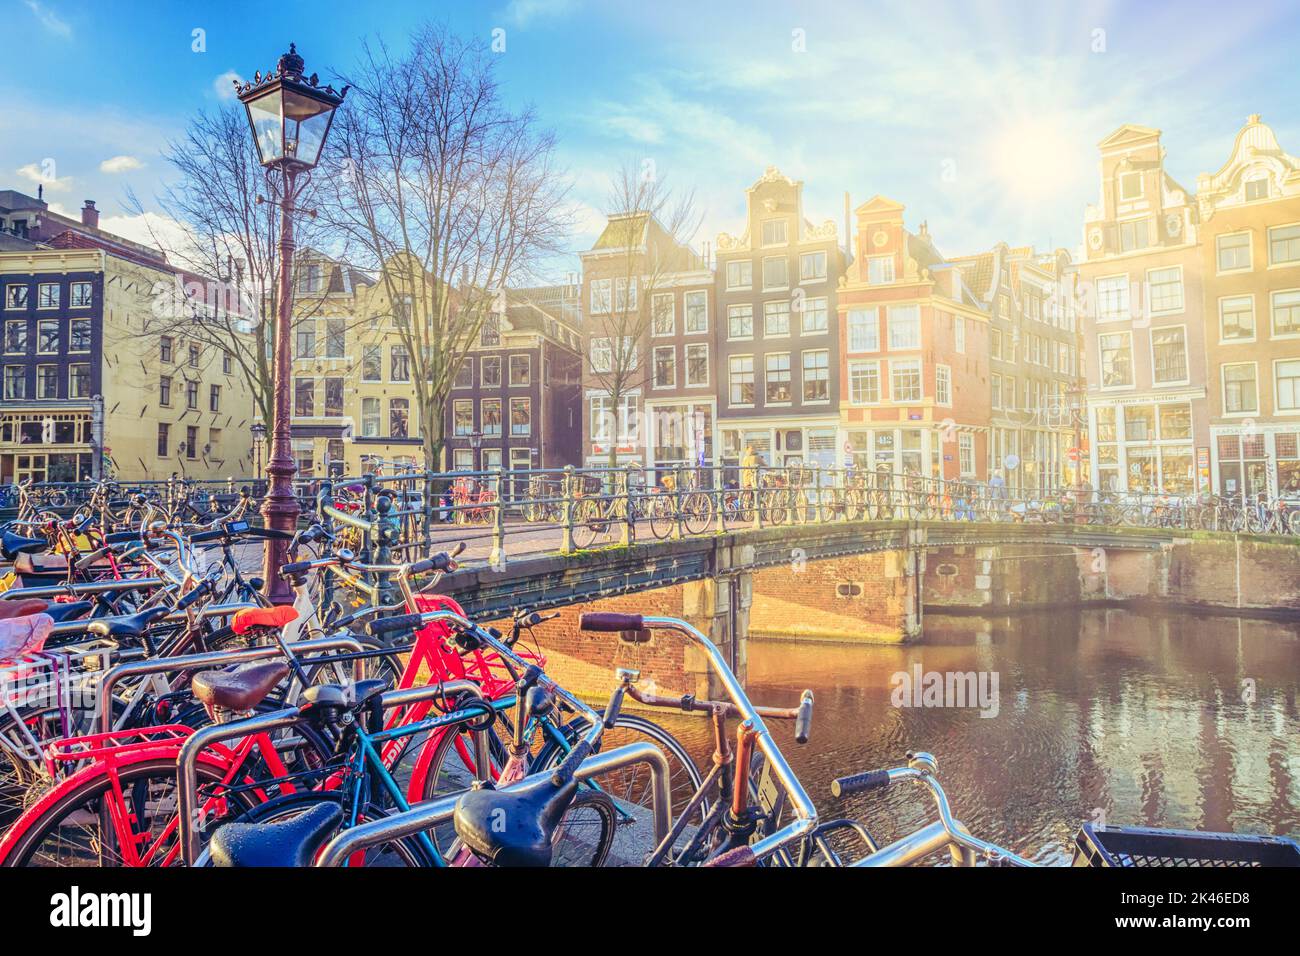 Cityscape on a sunny winter day - view of the bike parking in the historic center of Amsterdam, The Netherlands Stock Photo